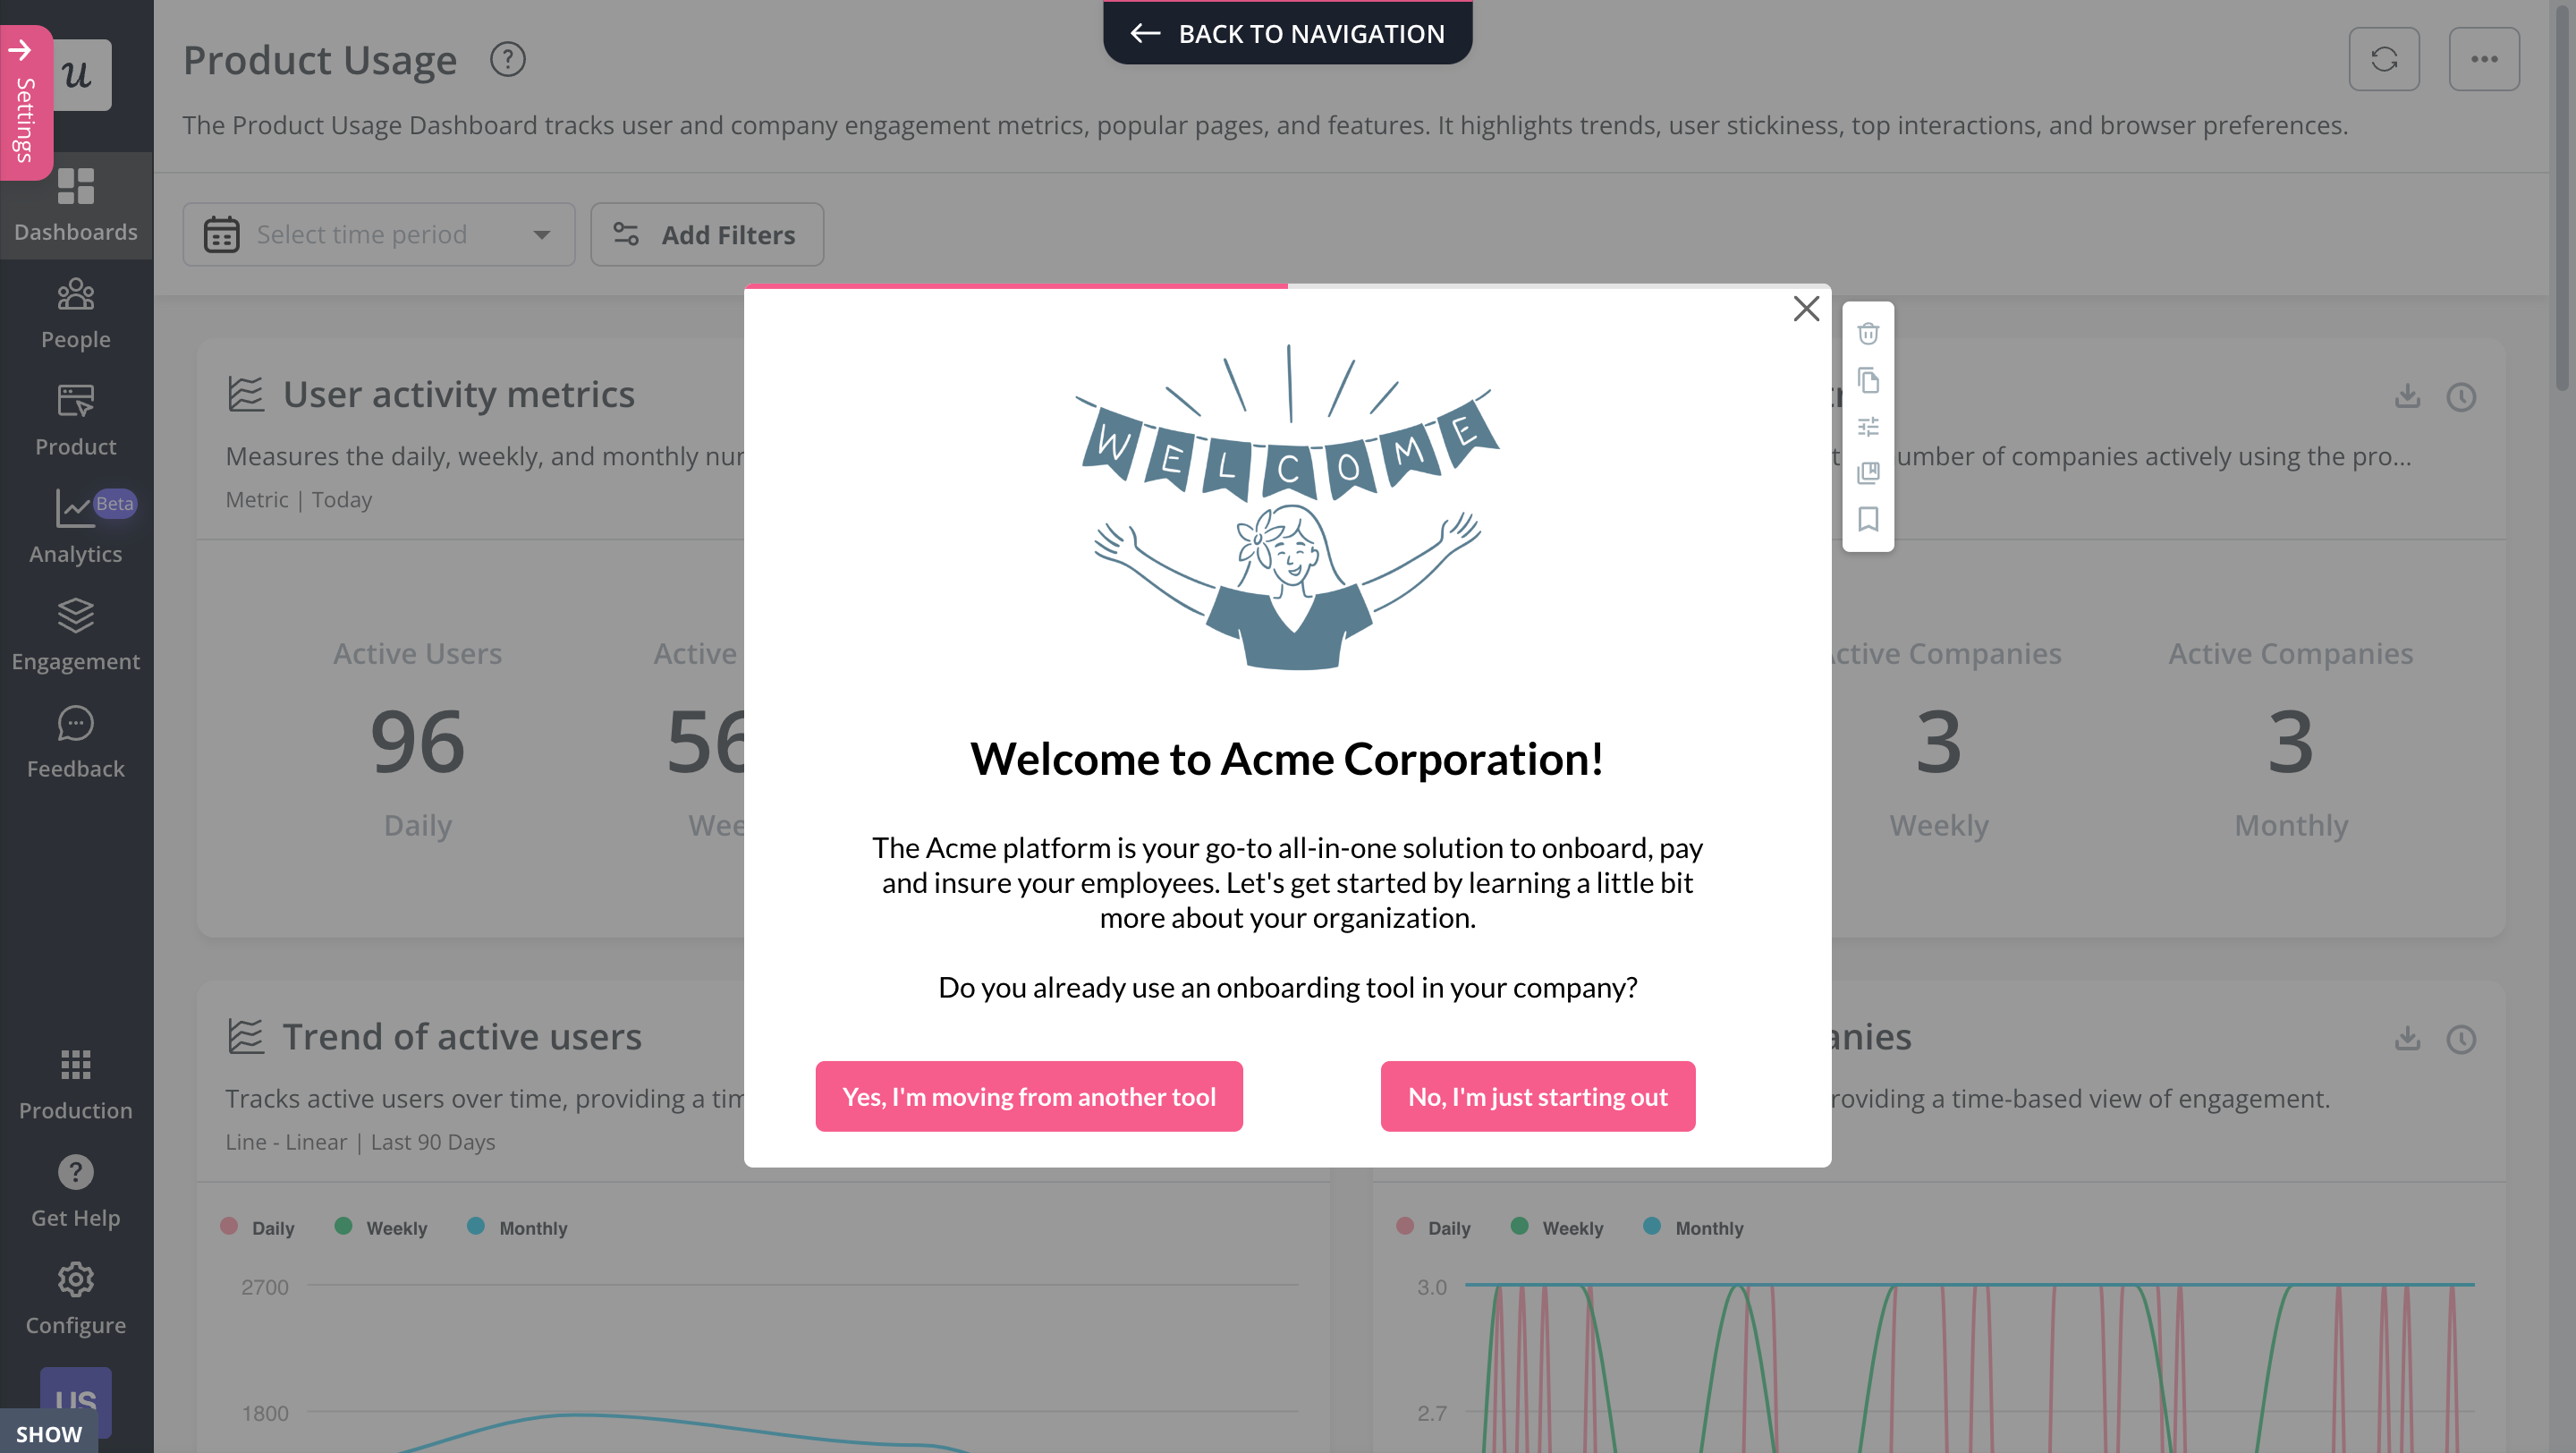 Let your users decide how to navigate through onboarding.